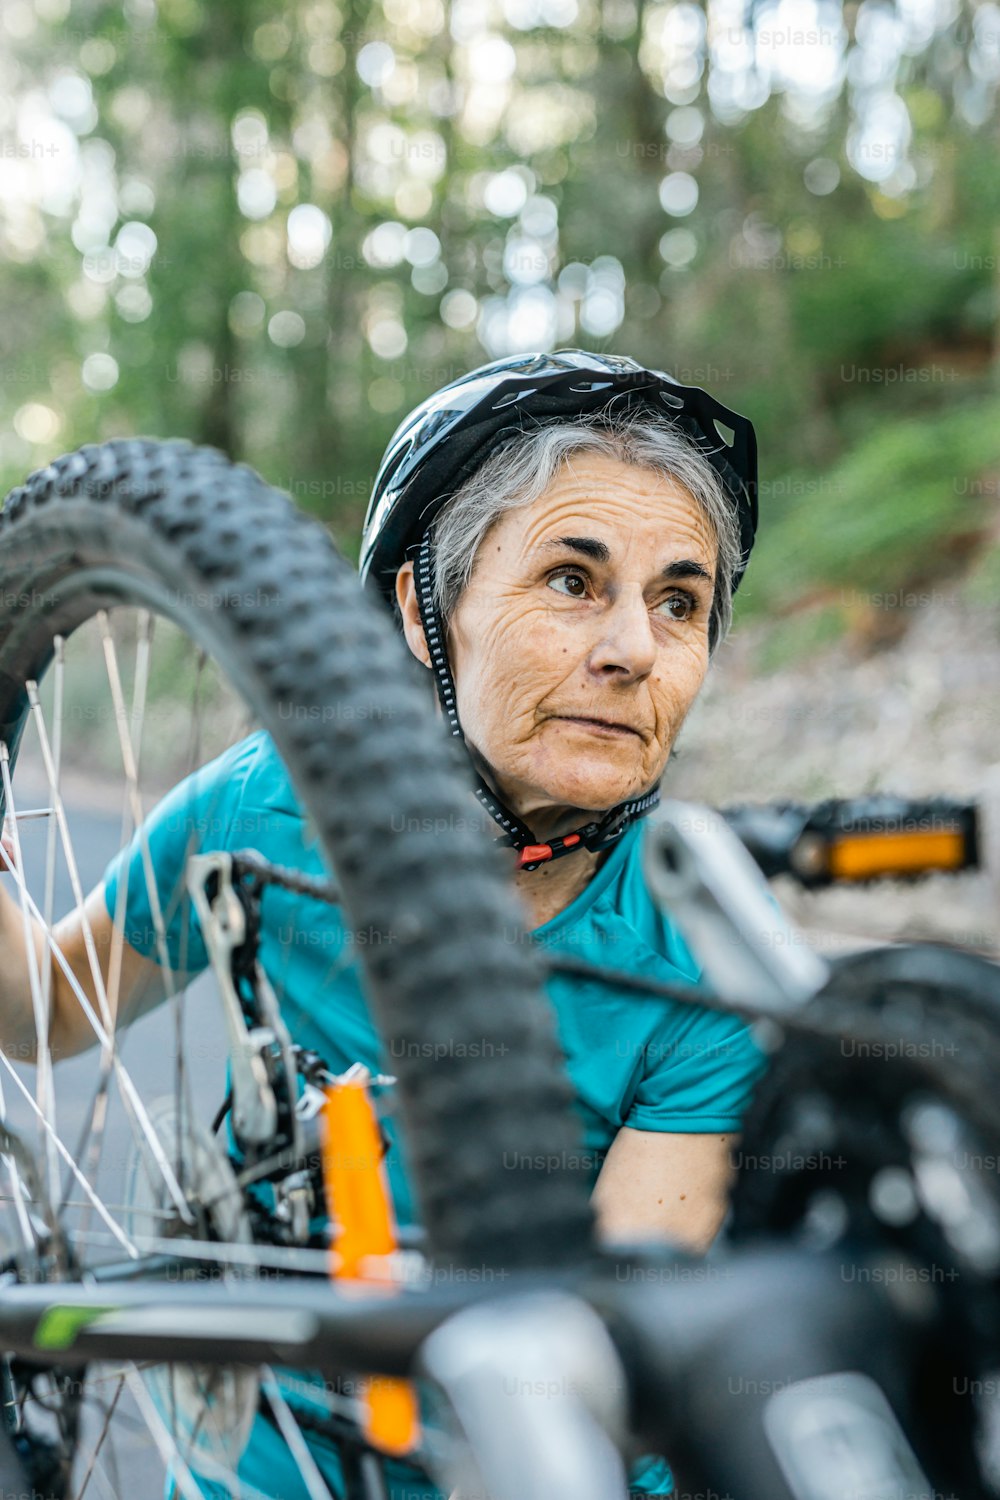 a woman with a helmet on is next to a bicycle